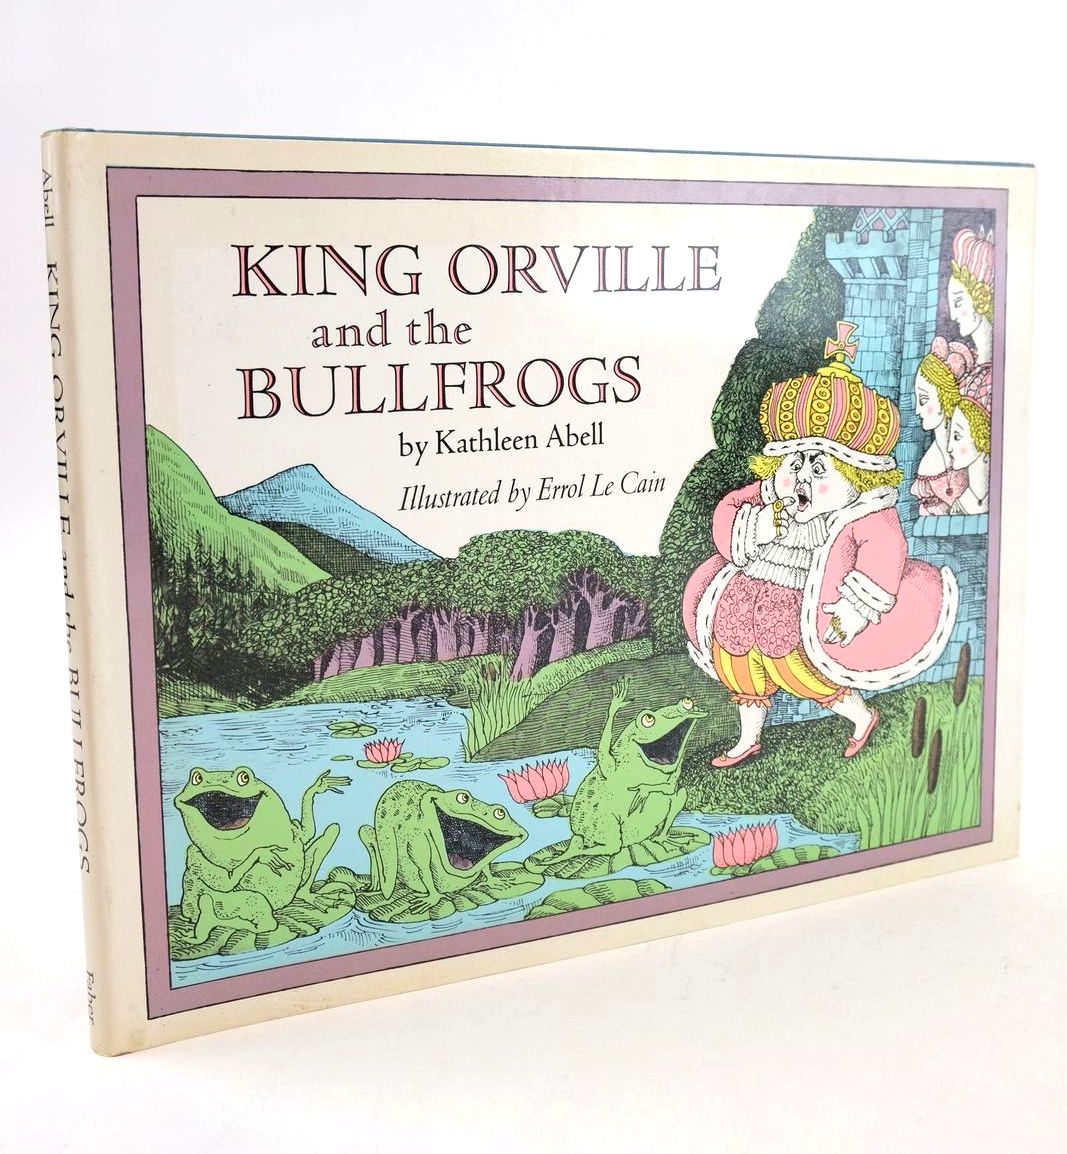 Photo of KING ORVILLE AND THE BULLFROGS written by Abell, Kathleen illustrated by Le Cain, Errol published by Faber & Faber (STOCK CODE: 1325033)  for sale by Stella & Rose's Books